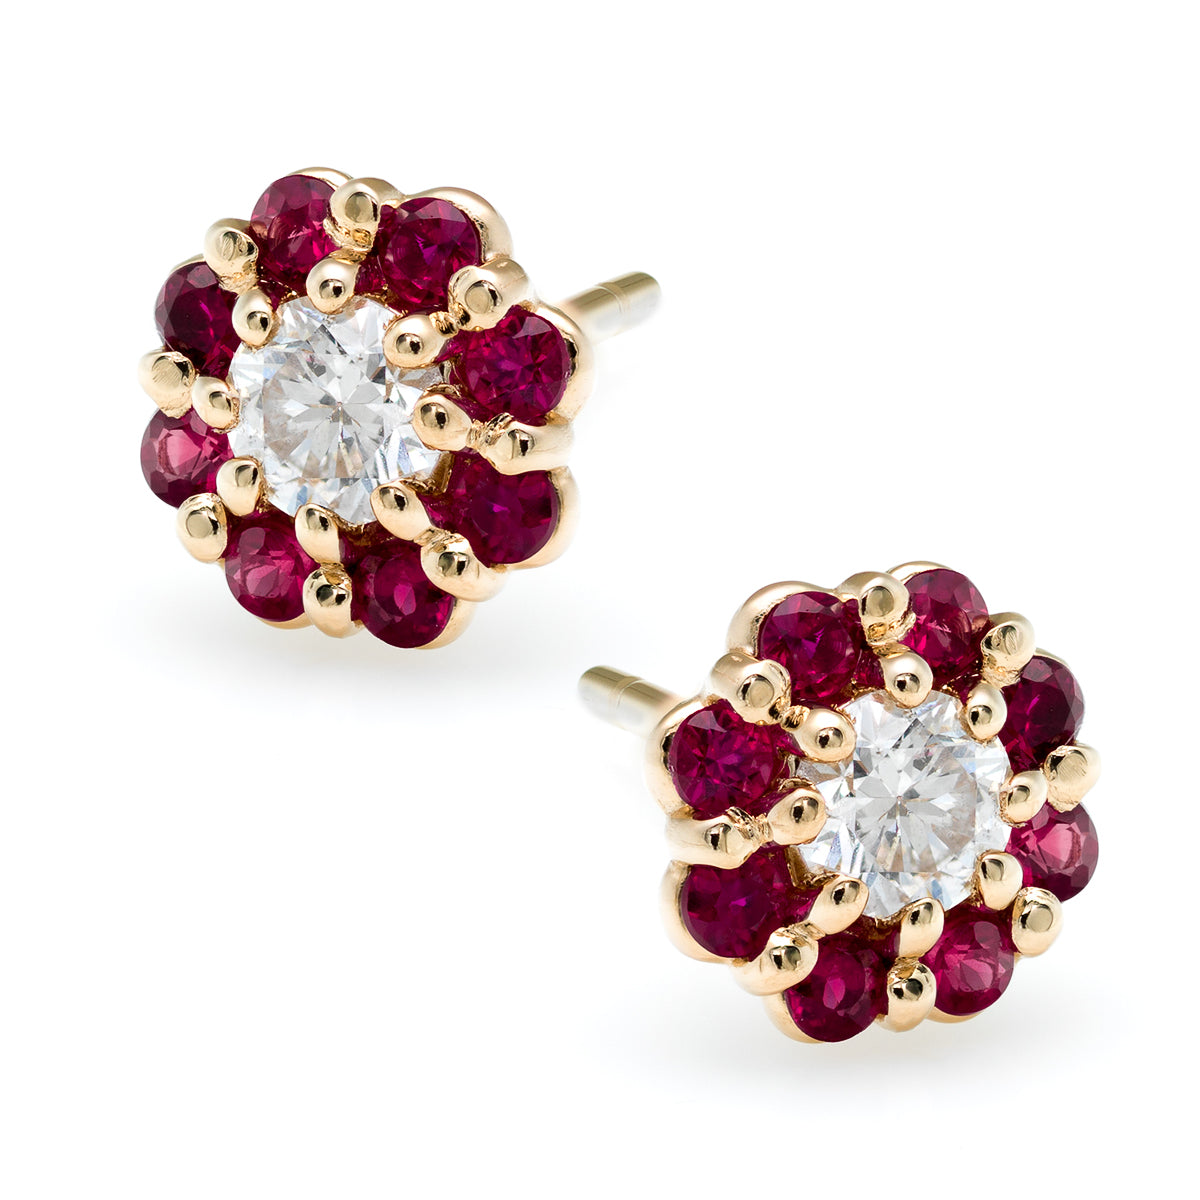 Irini Ruby and diamond petite full bloom flowers, post back14k gold earrings, these beauties will be your new classic and go to 